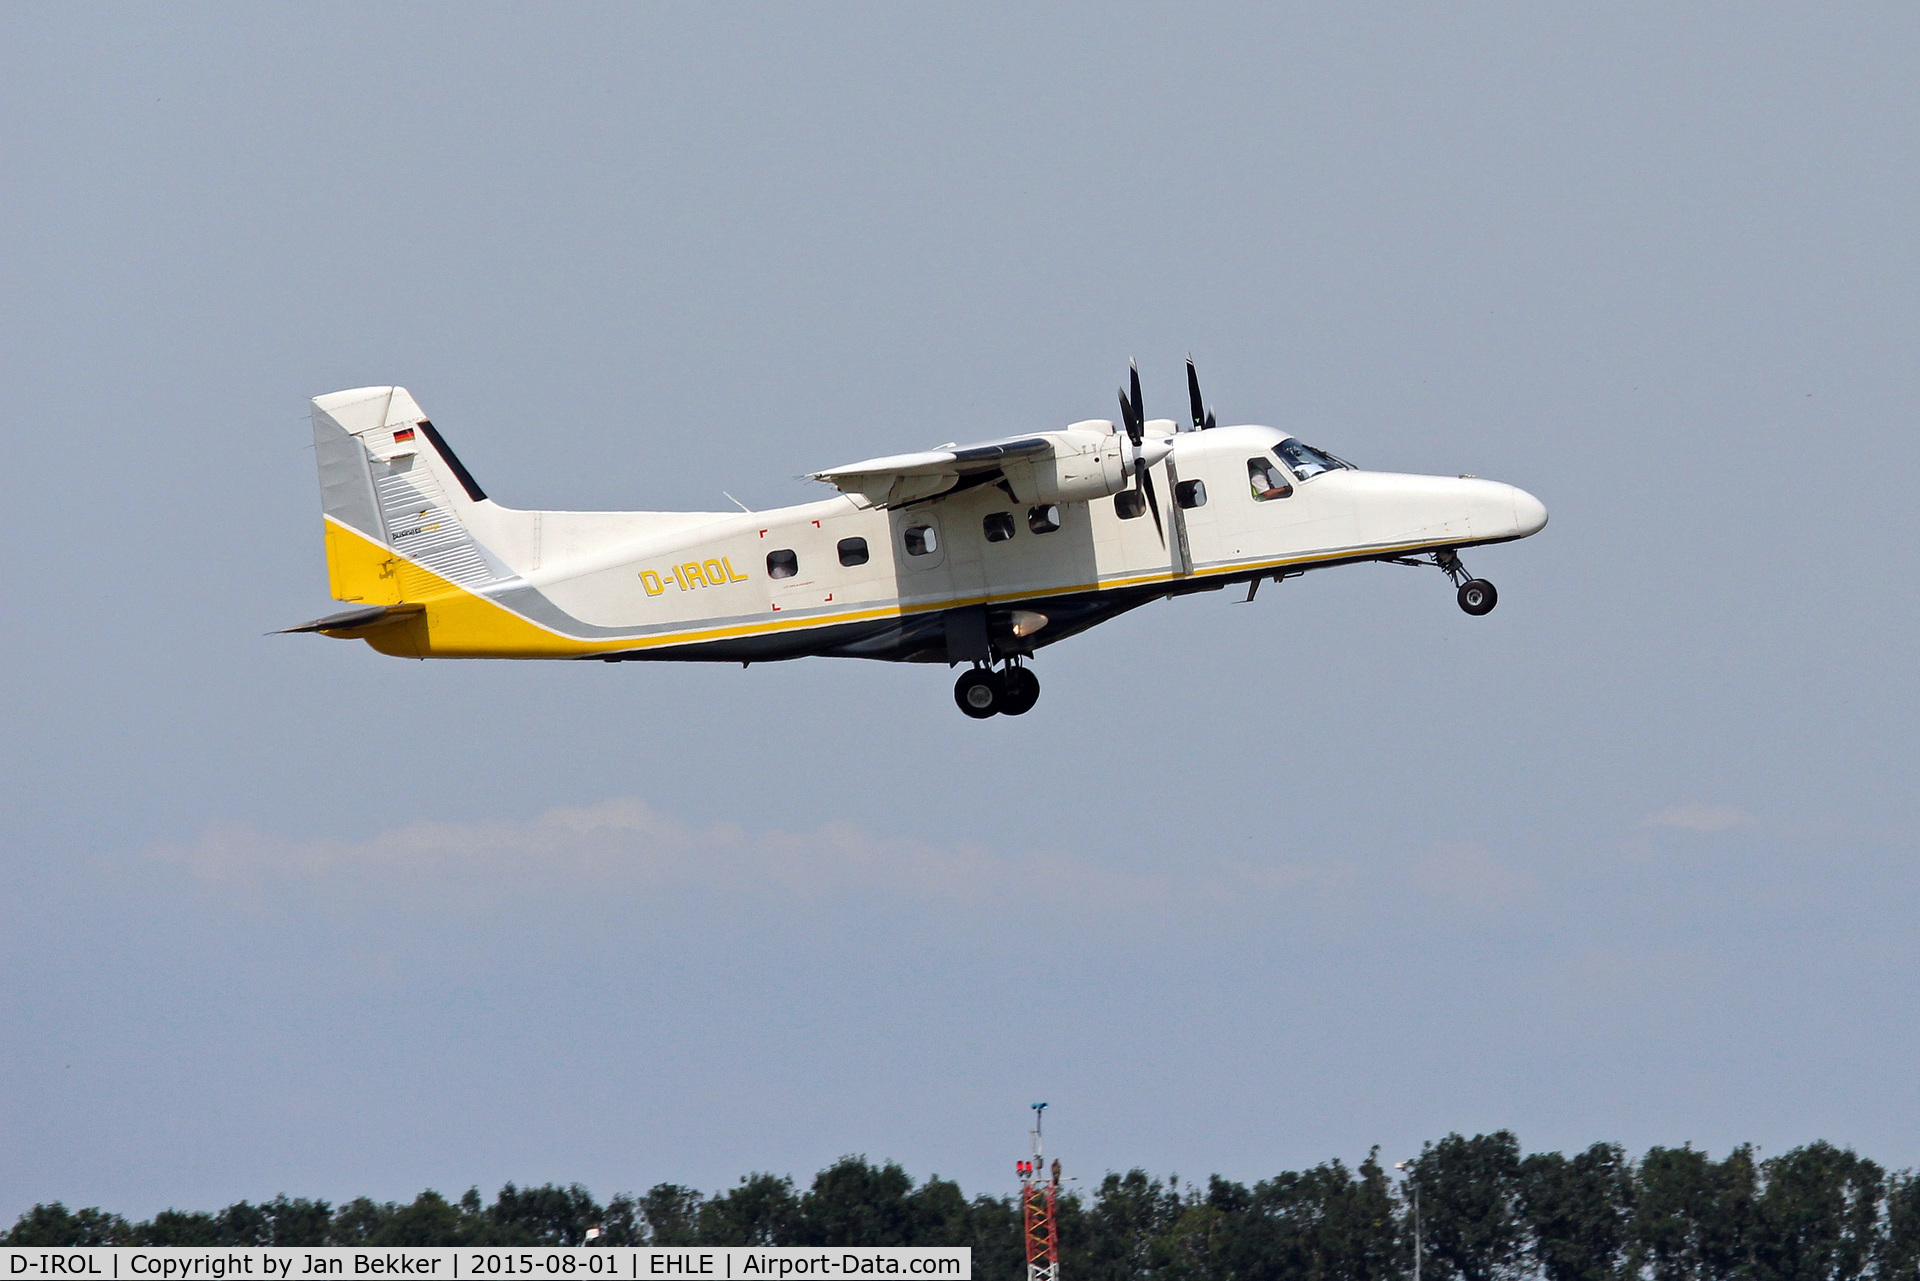 D-IROL, 1982 Dornier 228-100 C/N 7003, Just departed from Lelystad Airport on its way to Texel.